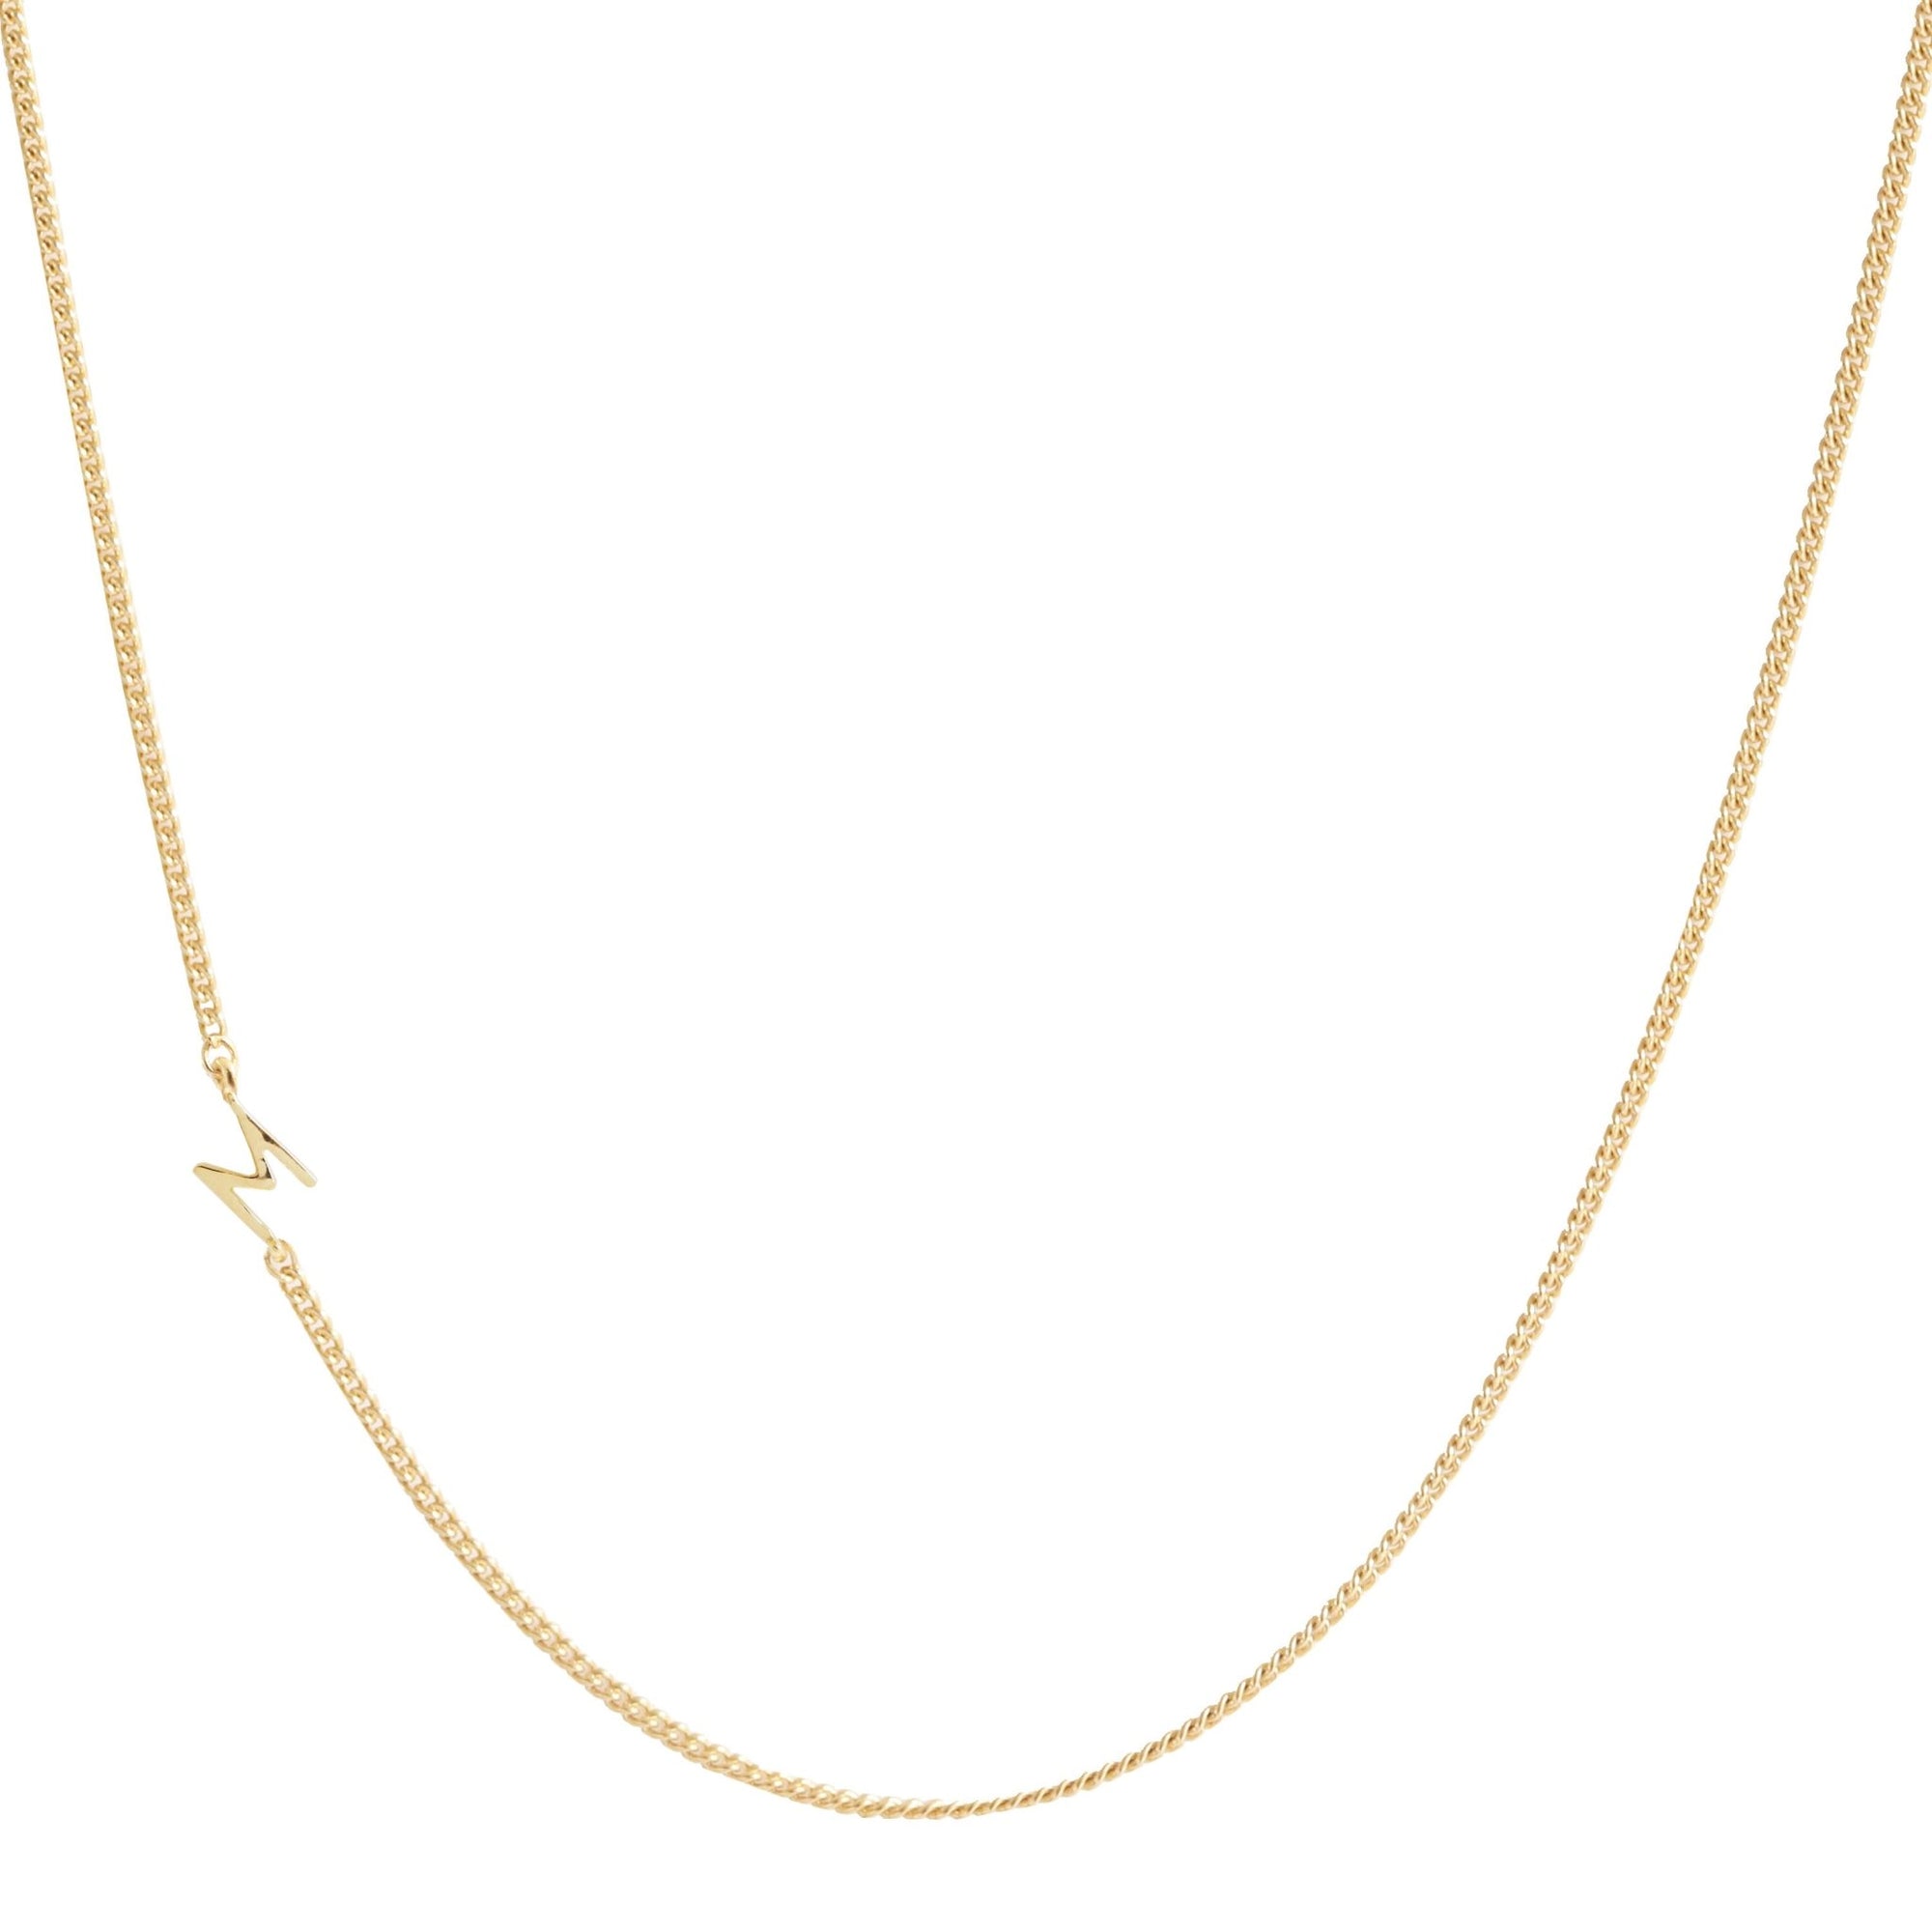 NOTABLE OFFSET INITIAL NECKLACE - M - GOLD - SO PRETTY CARA COTTER